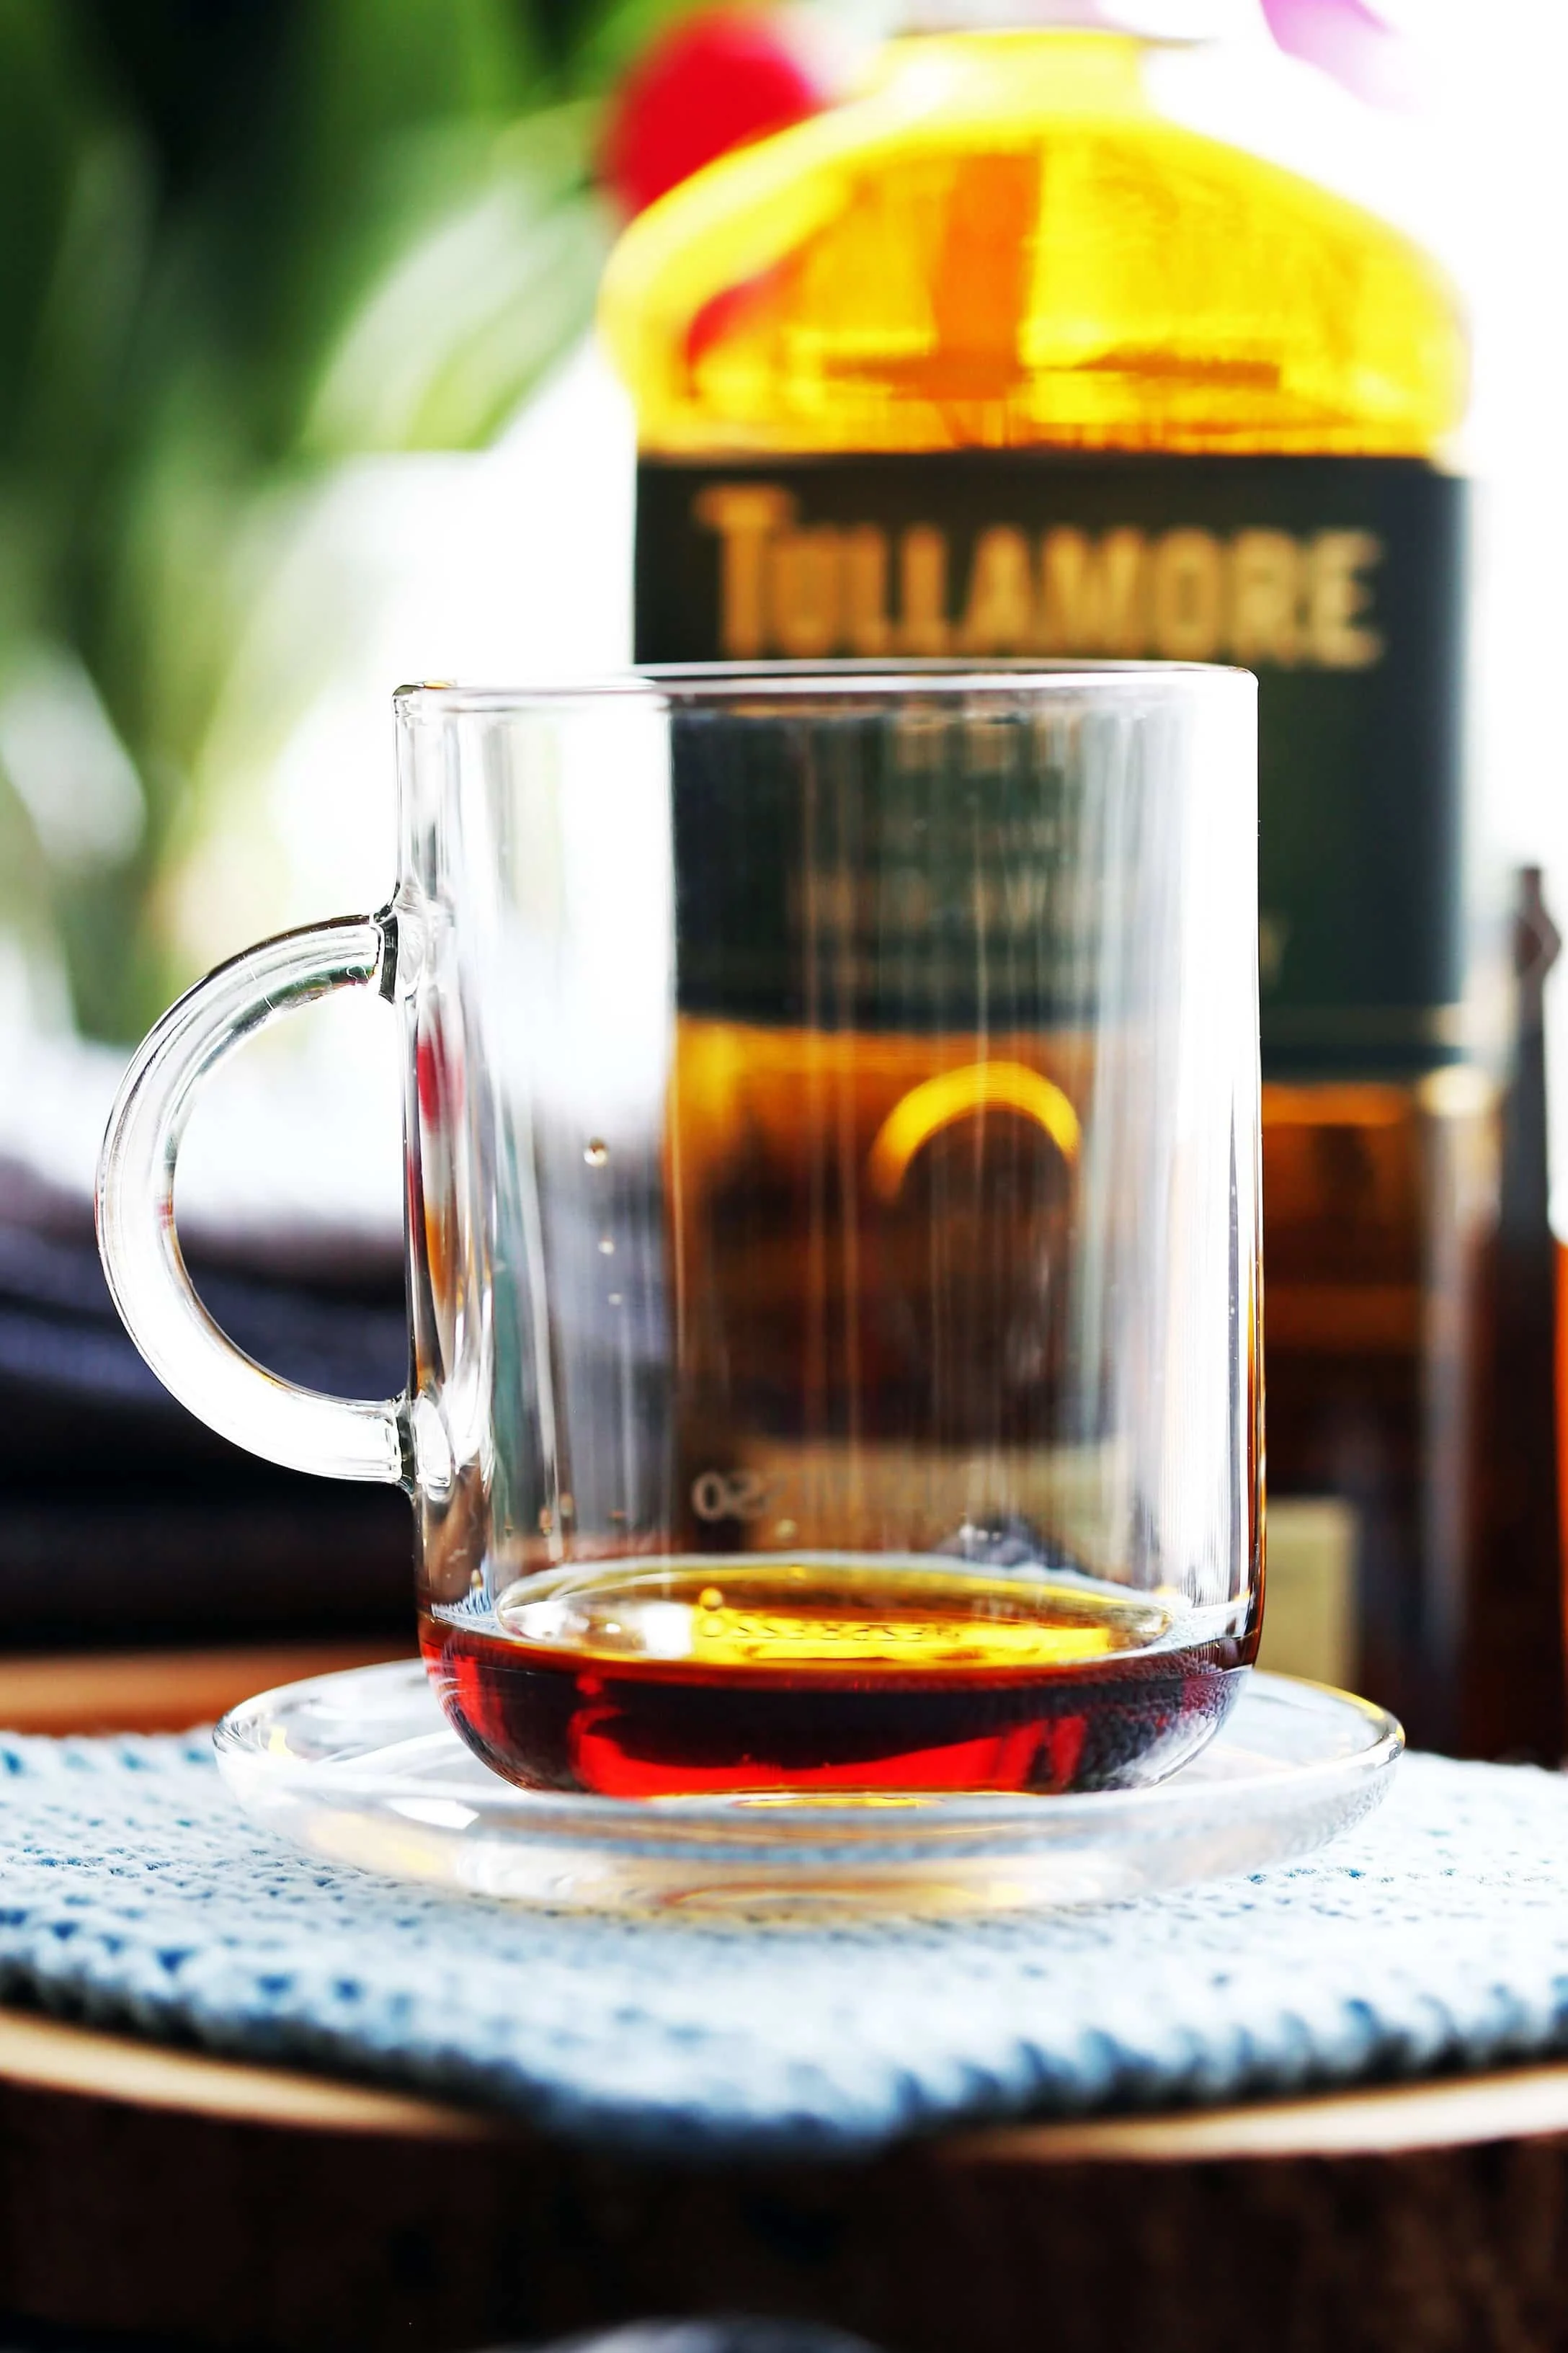 A side view of a glass mug filled with two tablespoons of maple syrup.